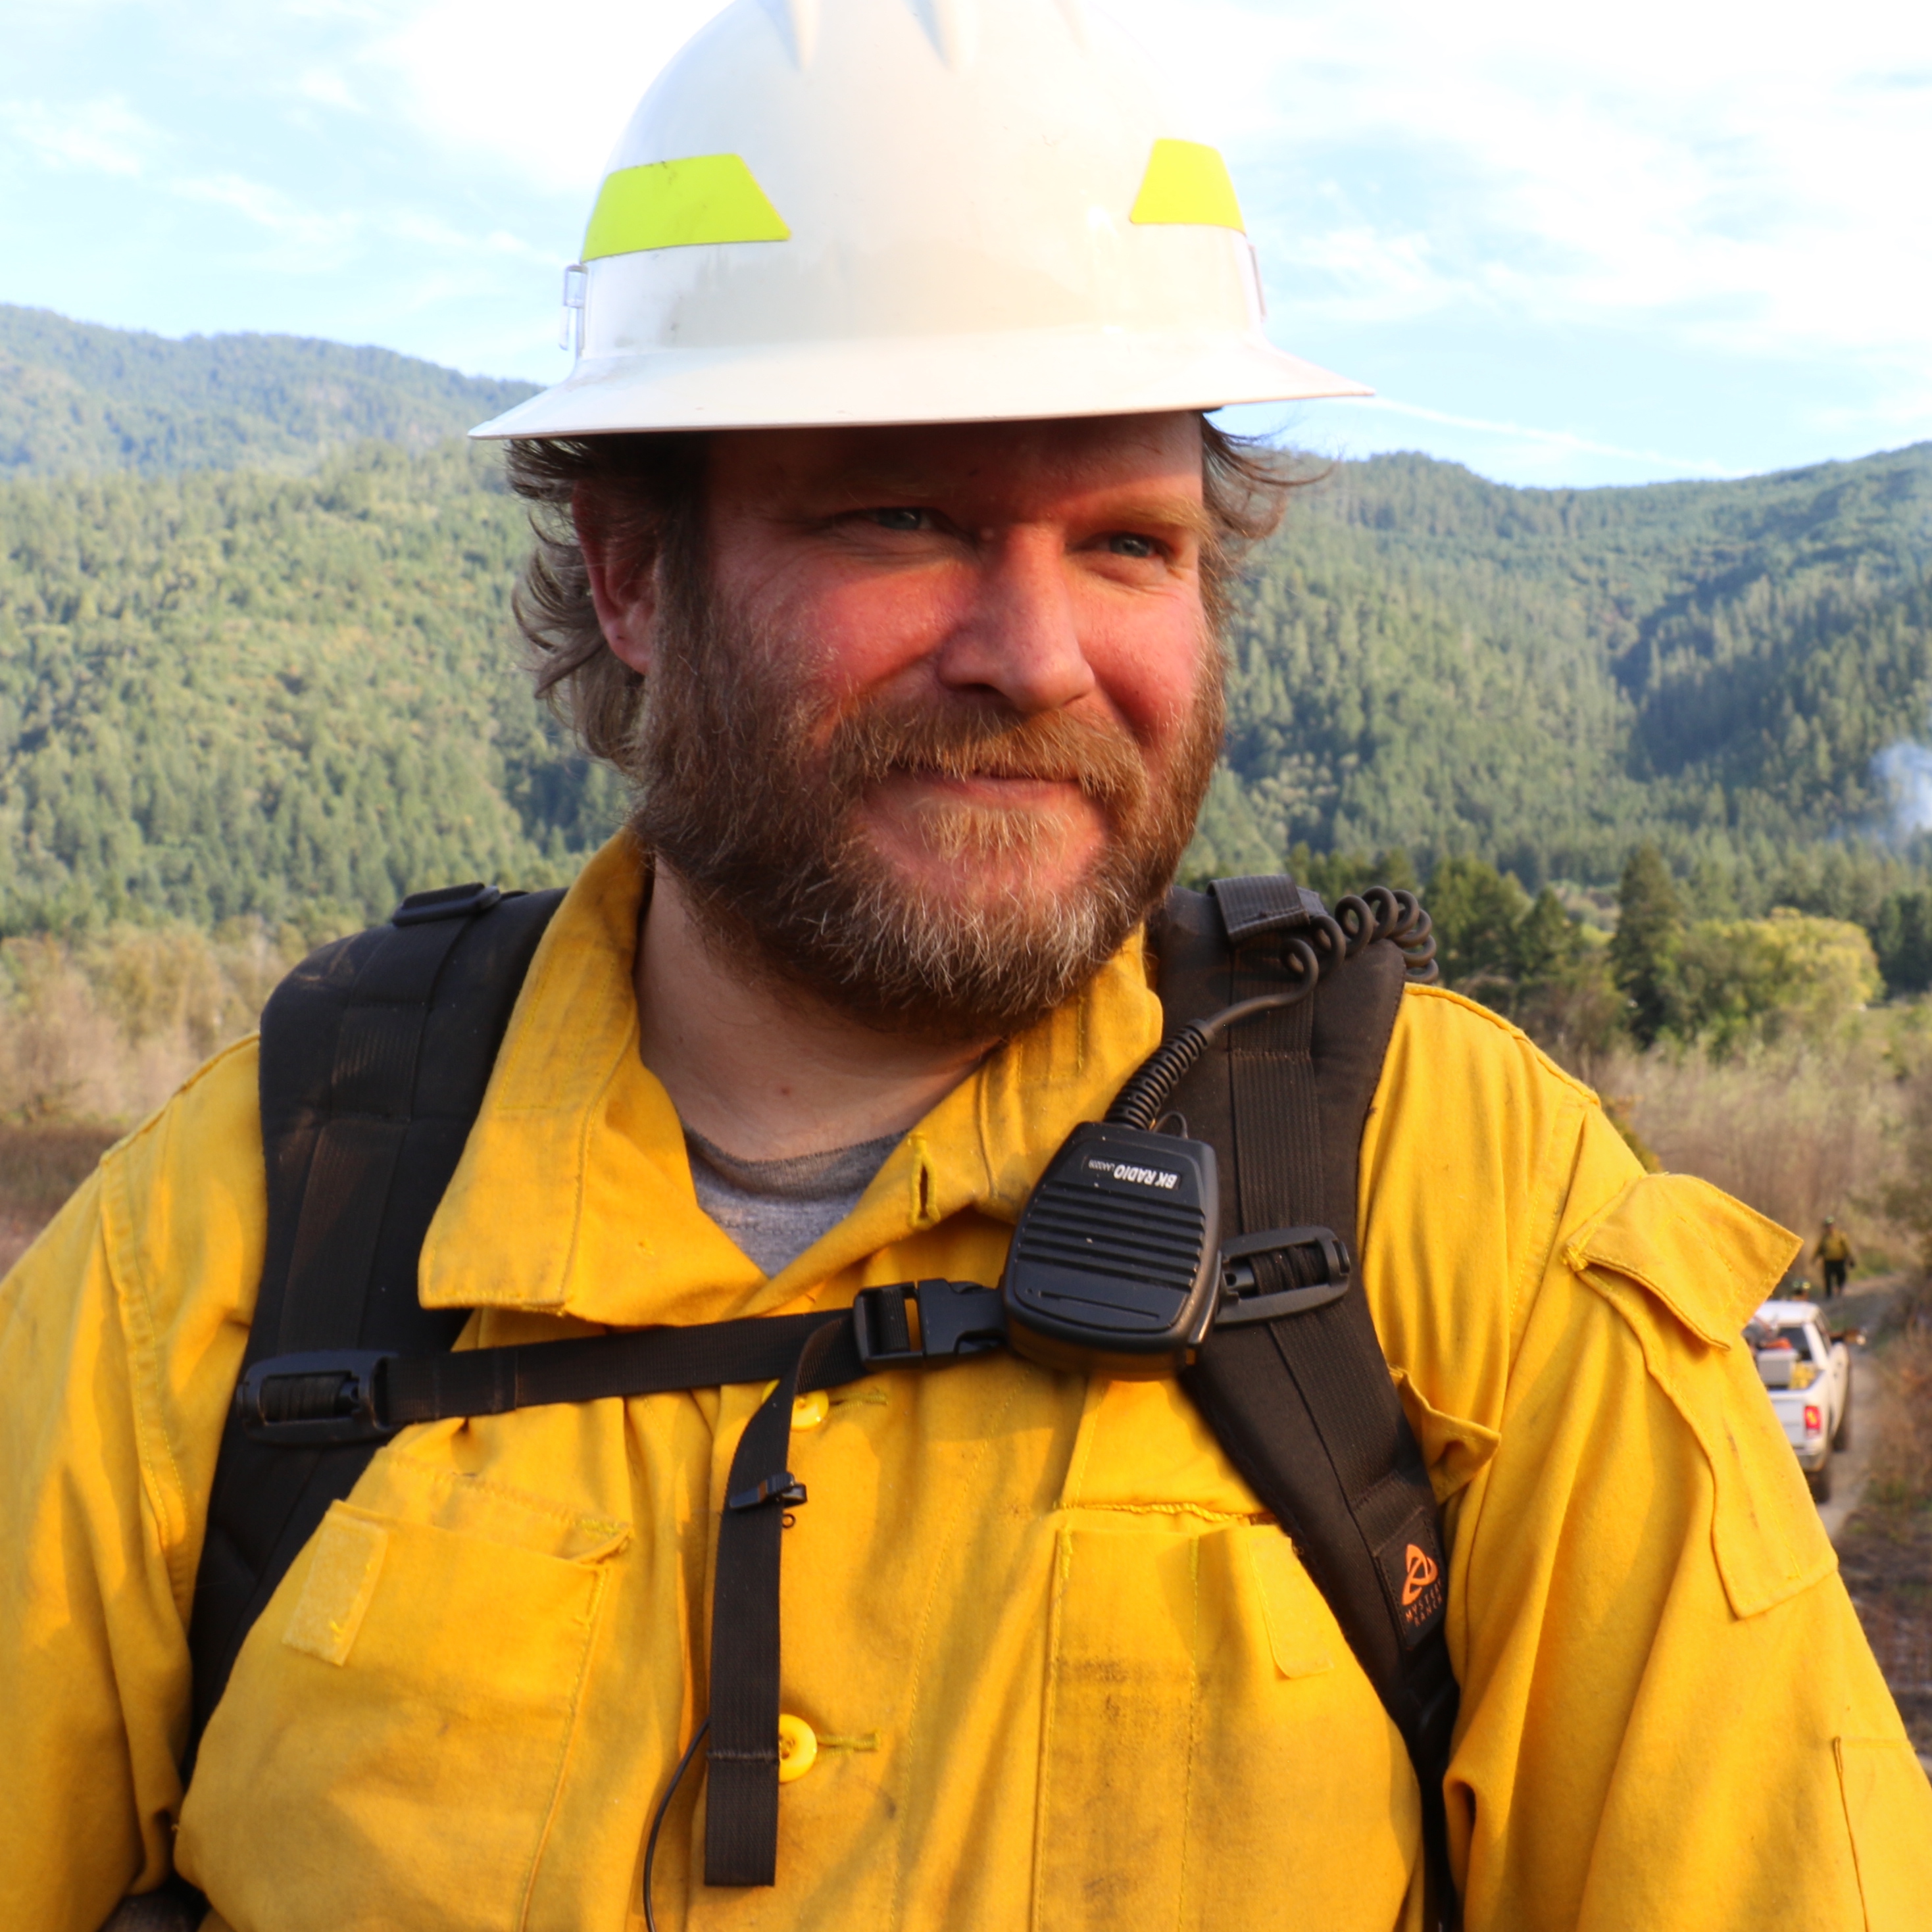 Image of Bill Tripp, Director of Natural Resources and Environmental Policy for the Karuk Tribe’s Department of Natural Resources